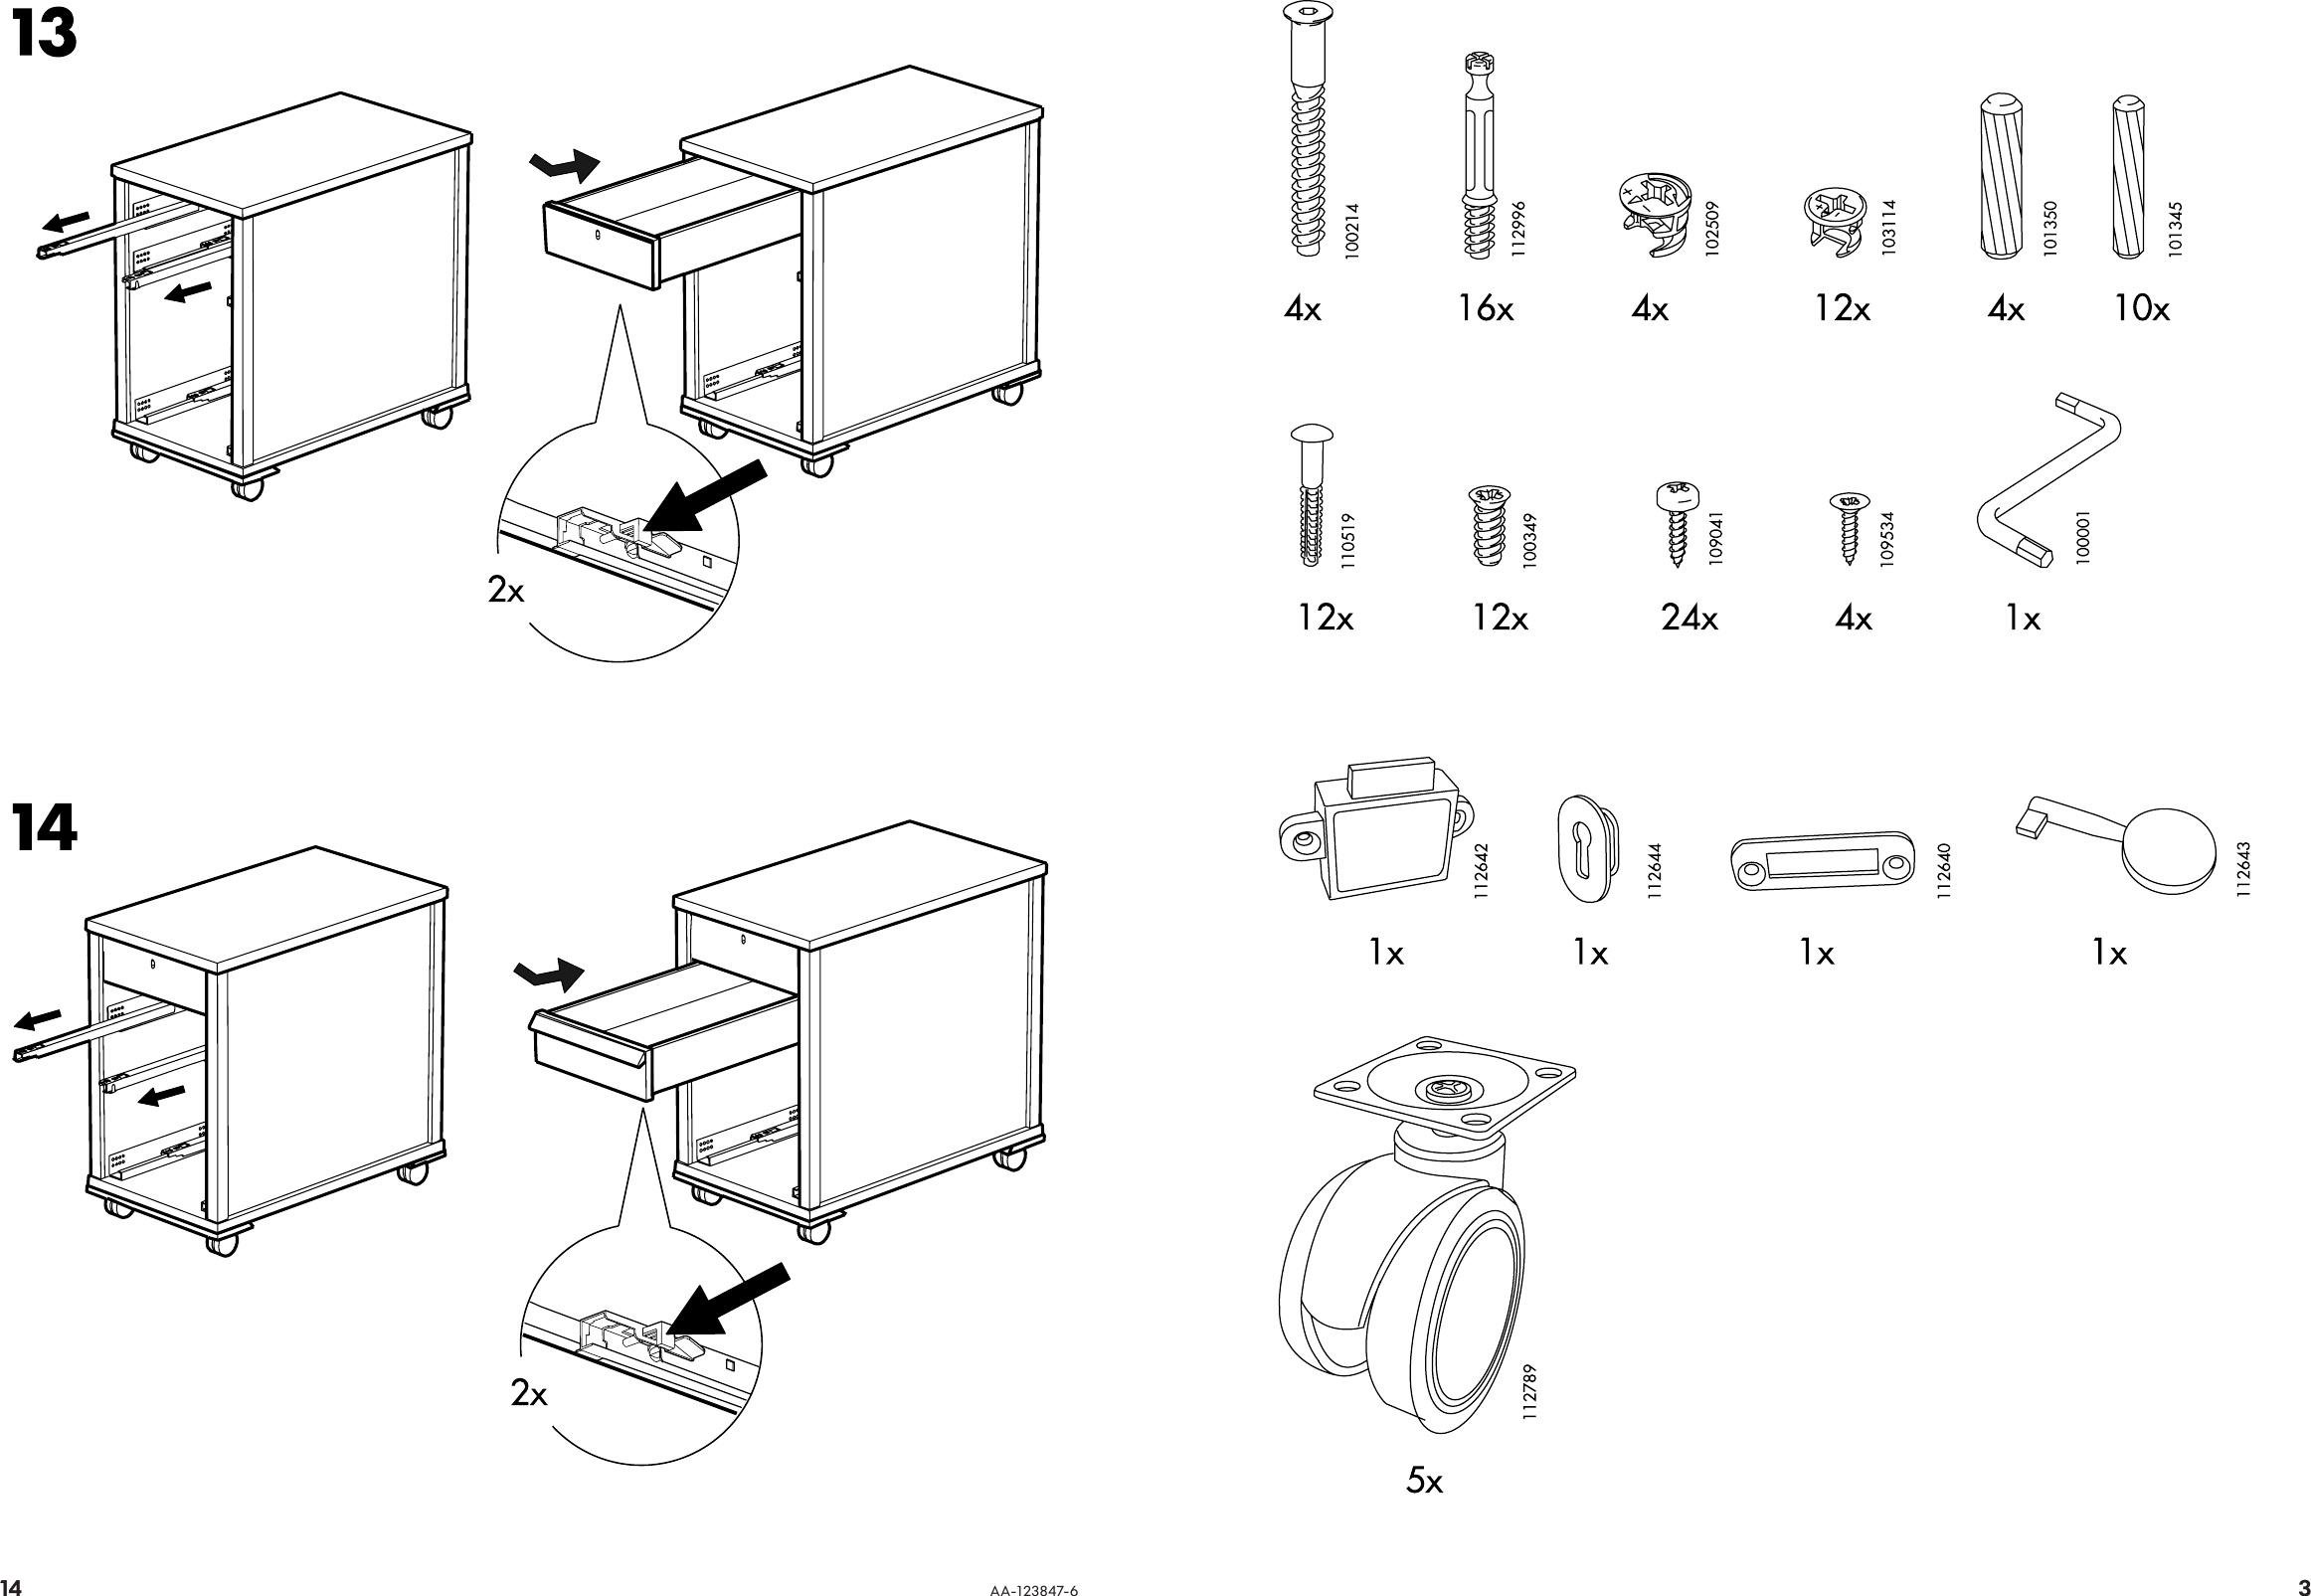 Page 3 of 8 - Ikea Ikea-Gustav-Drawer-Unit-Casters-14X24-Assembly-Instruction